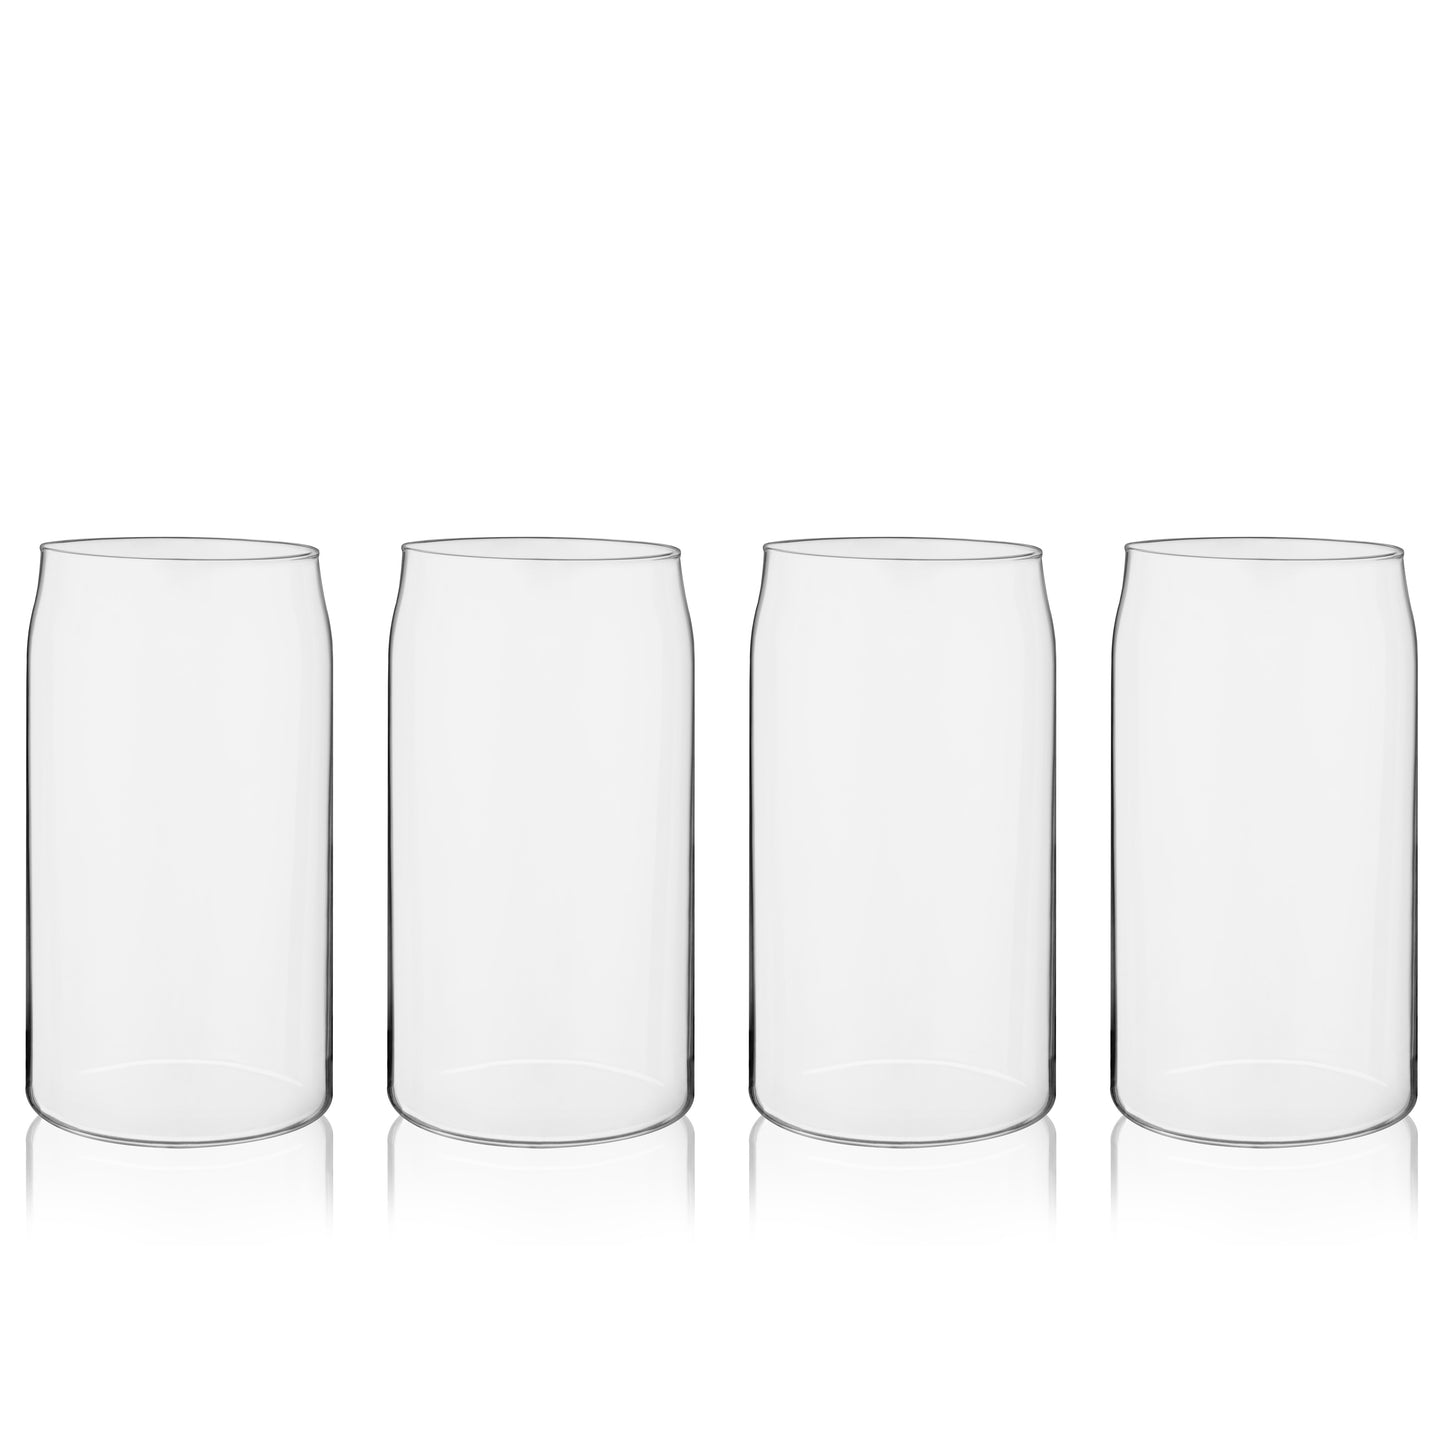 Celebrate your love of beer with this versatile beer glass shaped just like a beer can. Its streamlined shape fits maximum beer in minimum space, keeping your beer colder longer, while a tapered lip avoids spillage and holds a perfect layer of head. Holds 16 oz. Clear glass construction.